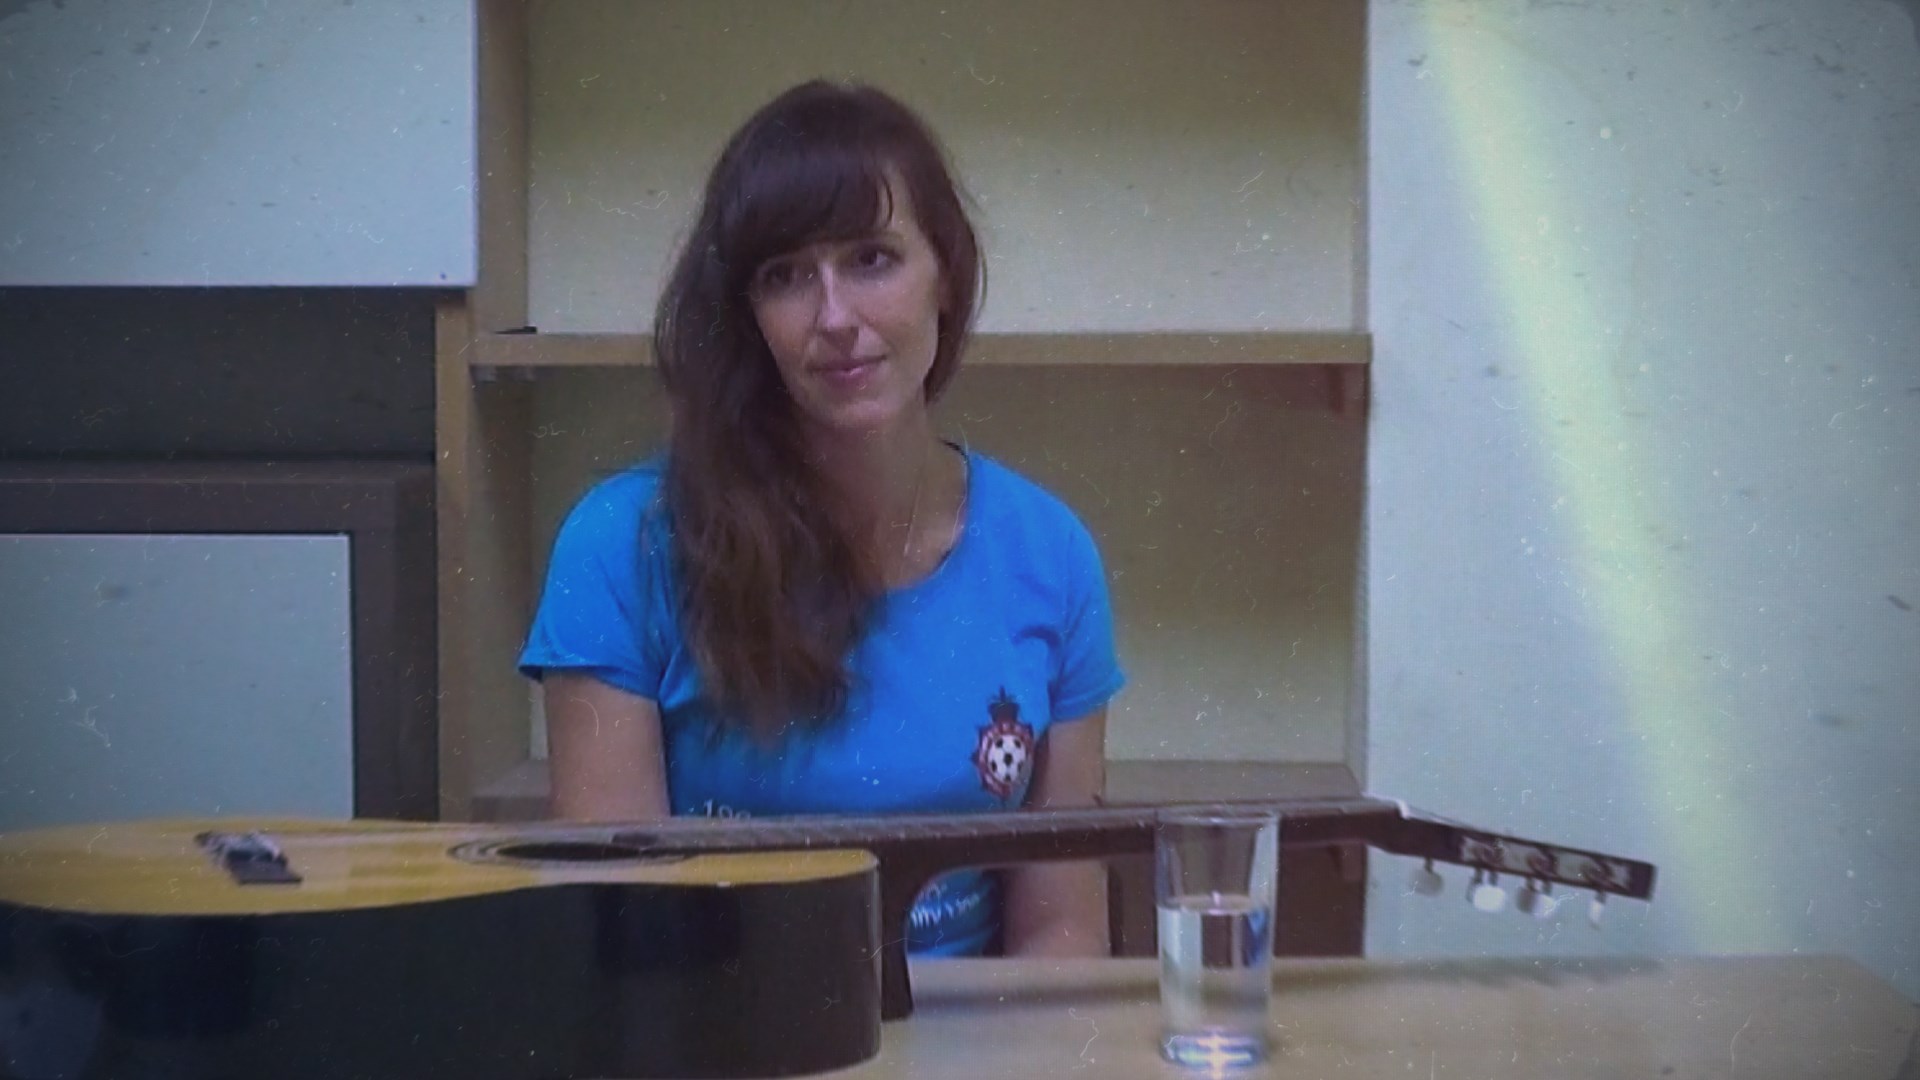 A woman with a guitar on a table in front of her